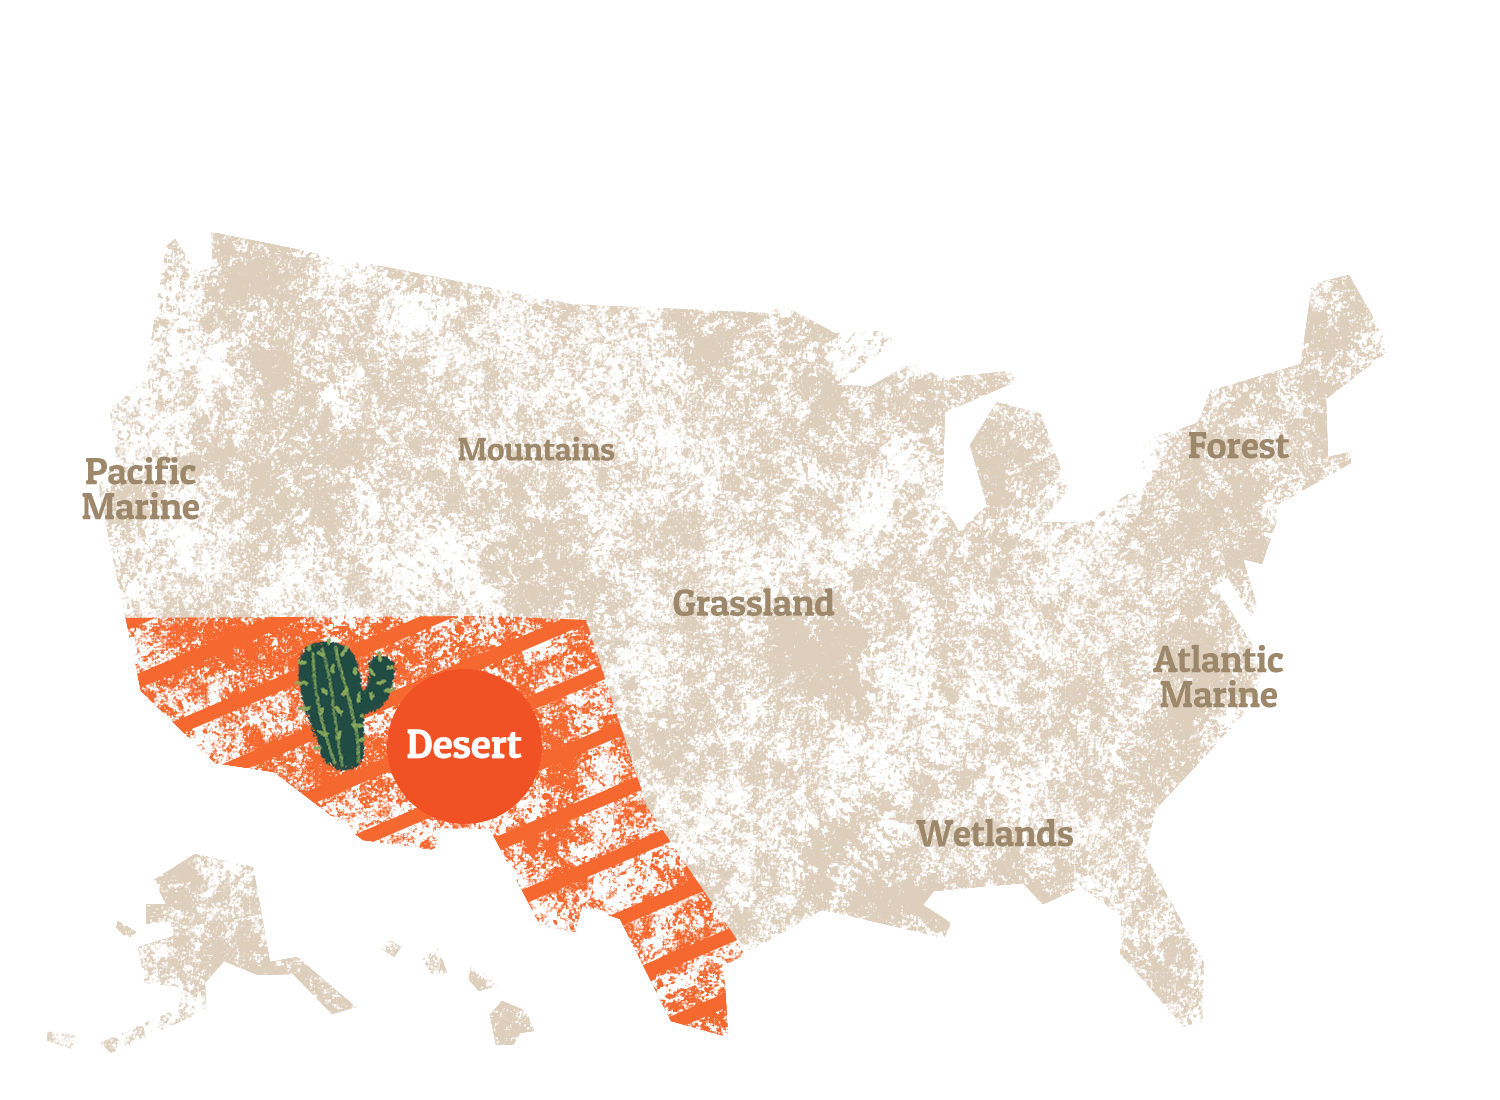 A graphic map of the United States, highlighting the Desert.